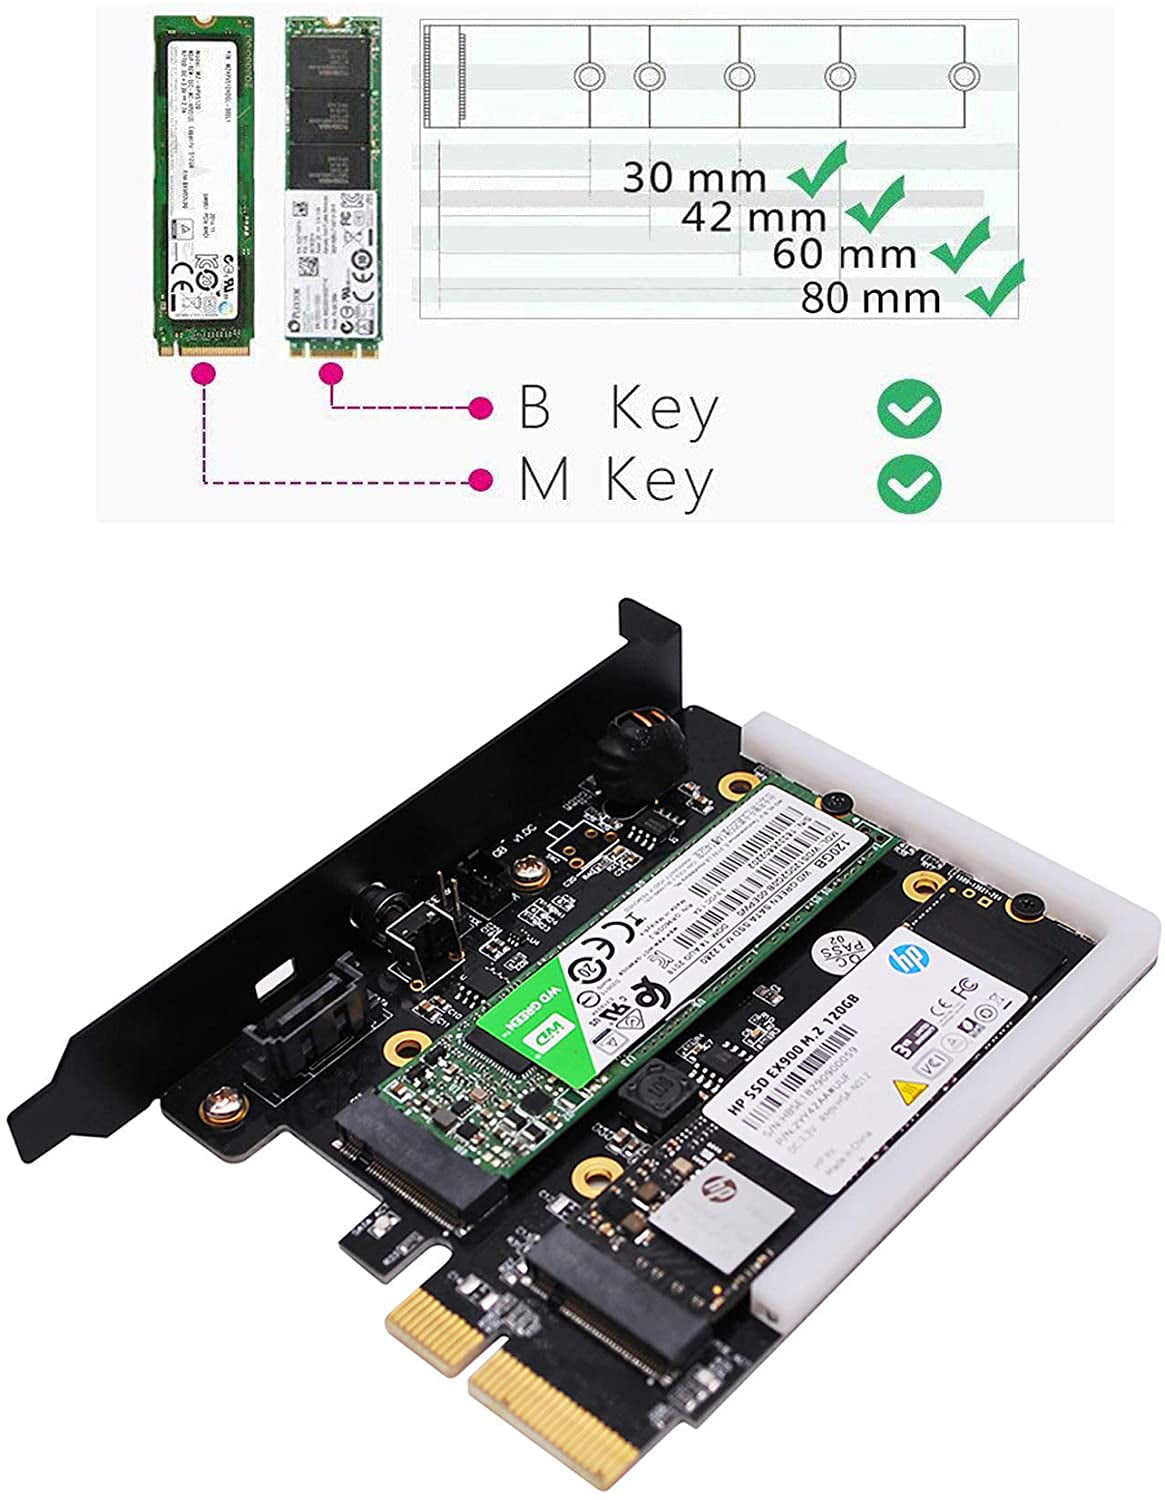 EZDIY-FAB Dual M.2 Adapter with Heatpipe Cooling System M.2 PCIe NVMe and PCIe AHCI SSD to PCIe 3.0 x4 and M.2 SATA SSD to SATA III Adapter Card 